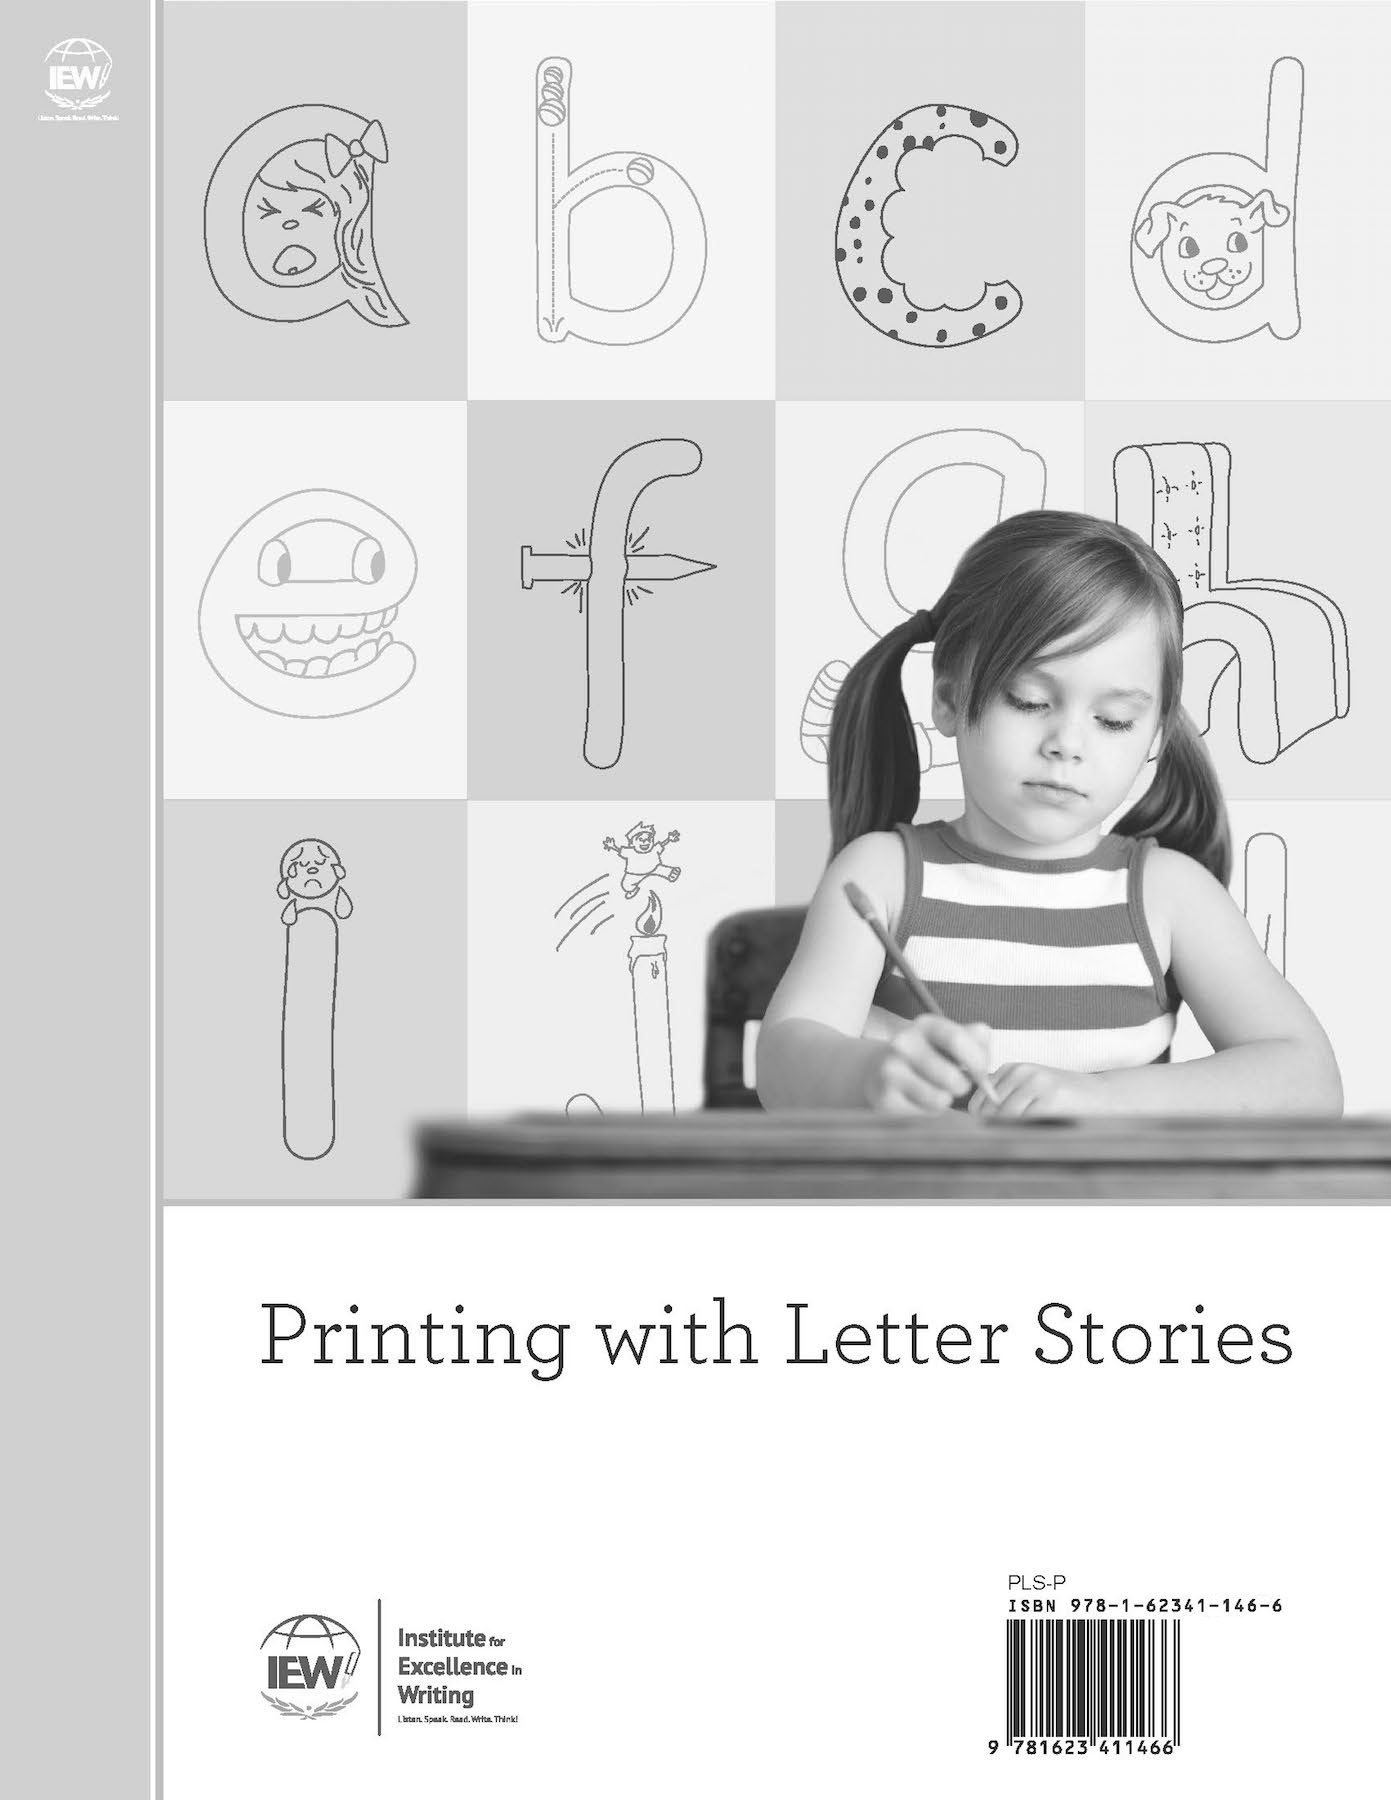 Printing with Letter Stories [Packet]